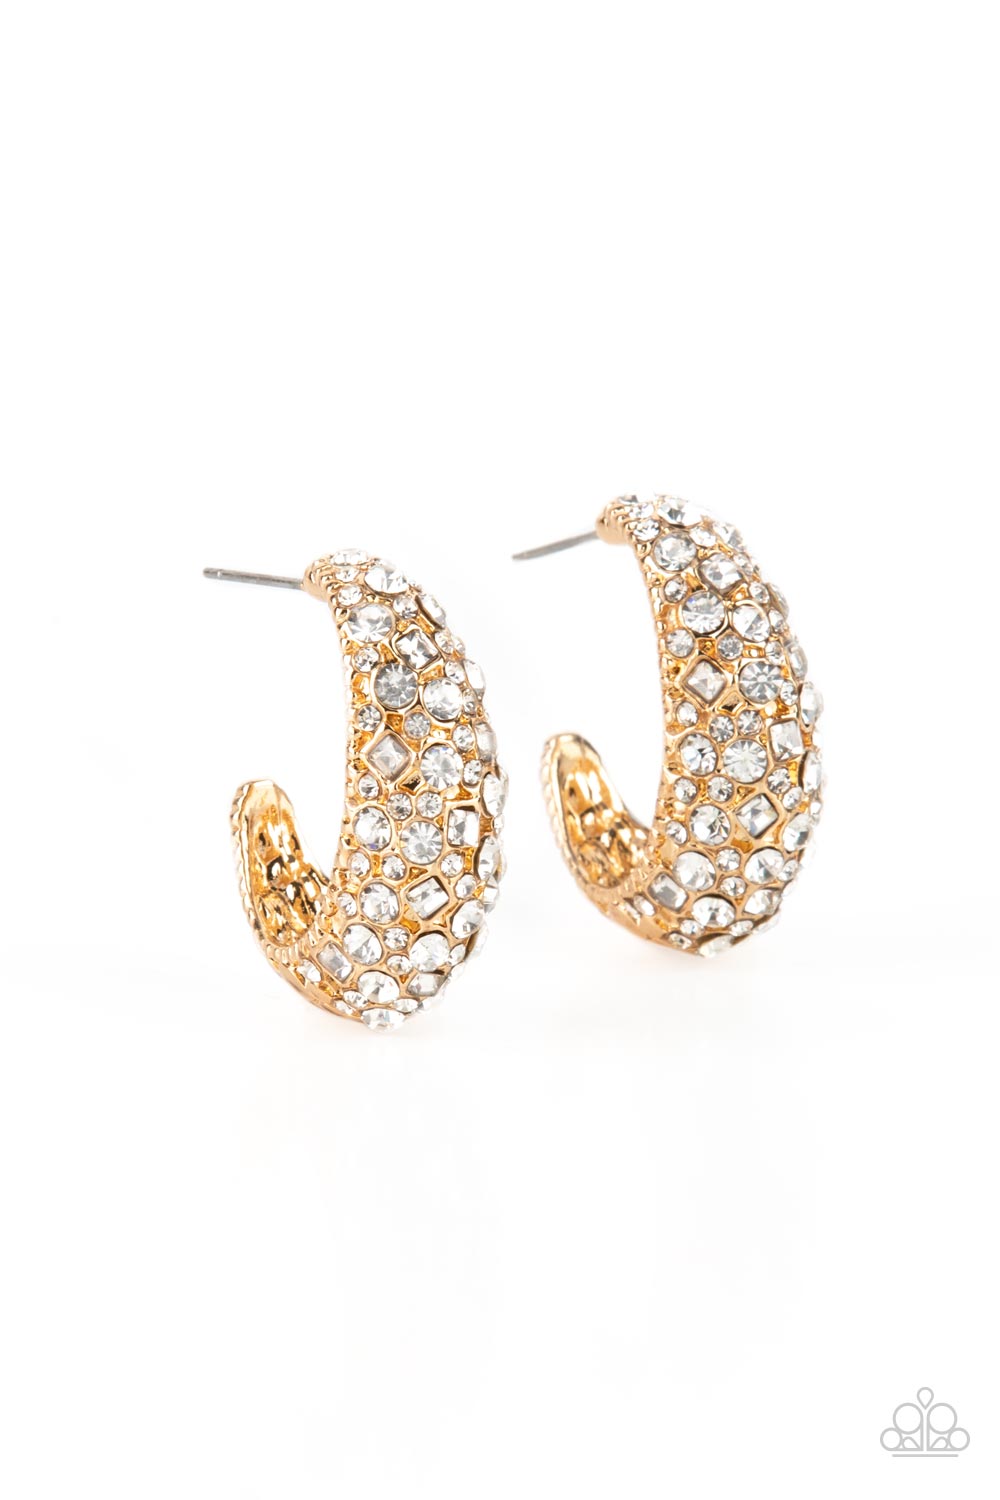 Glamorously Glimmering - Gold Earring - Paparazzi - Dare2bdazzlin N Jewelry